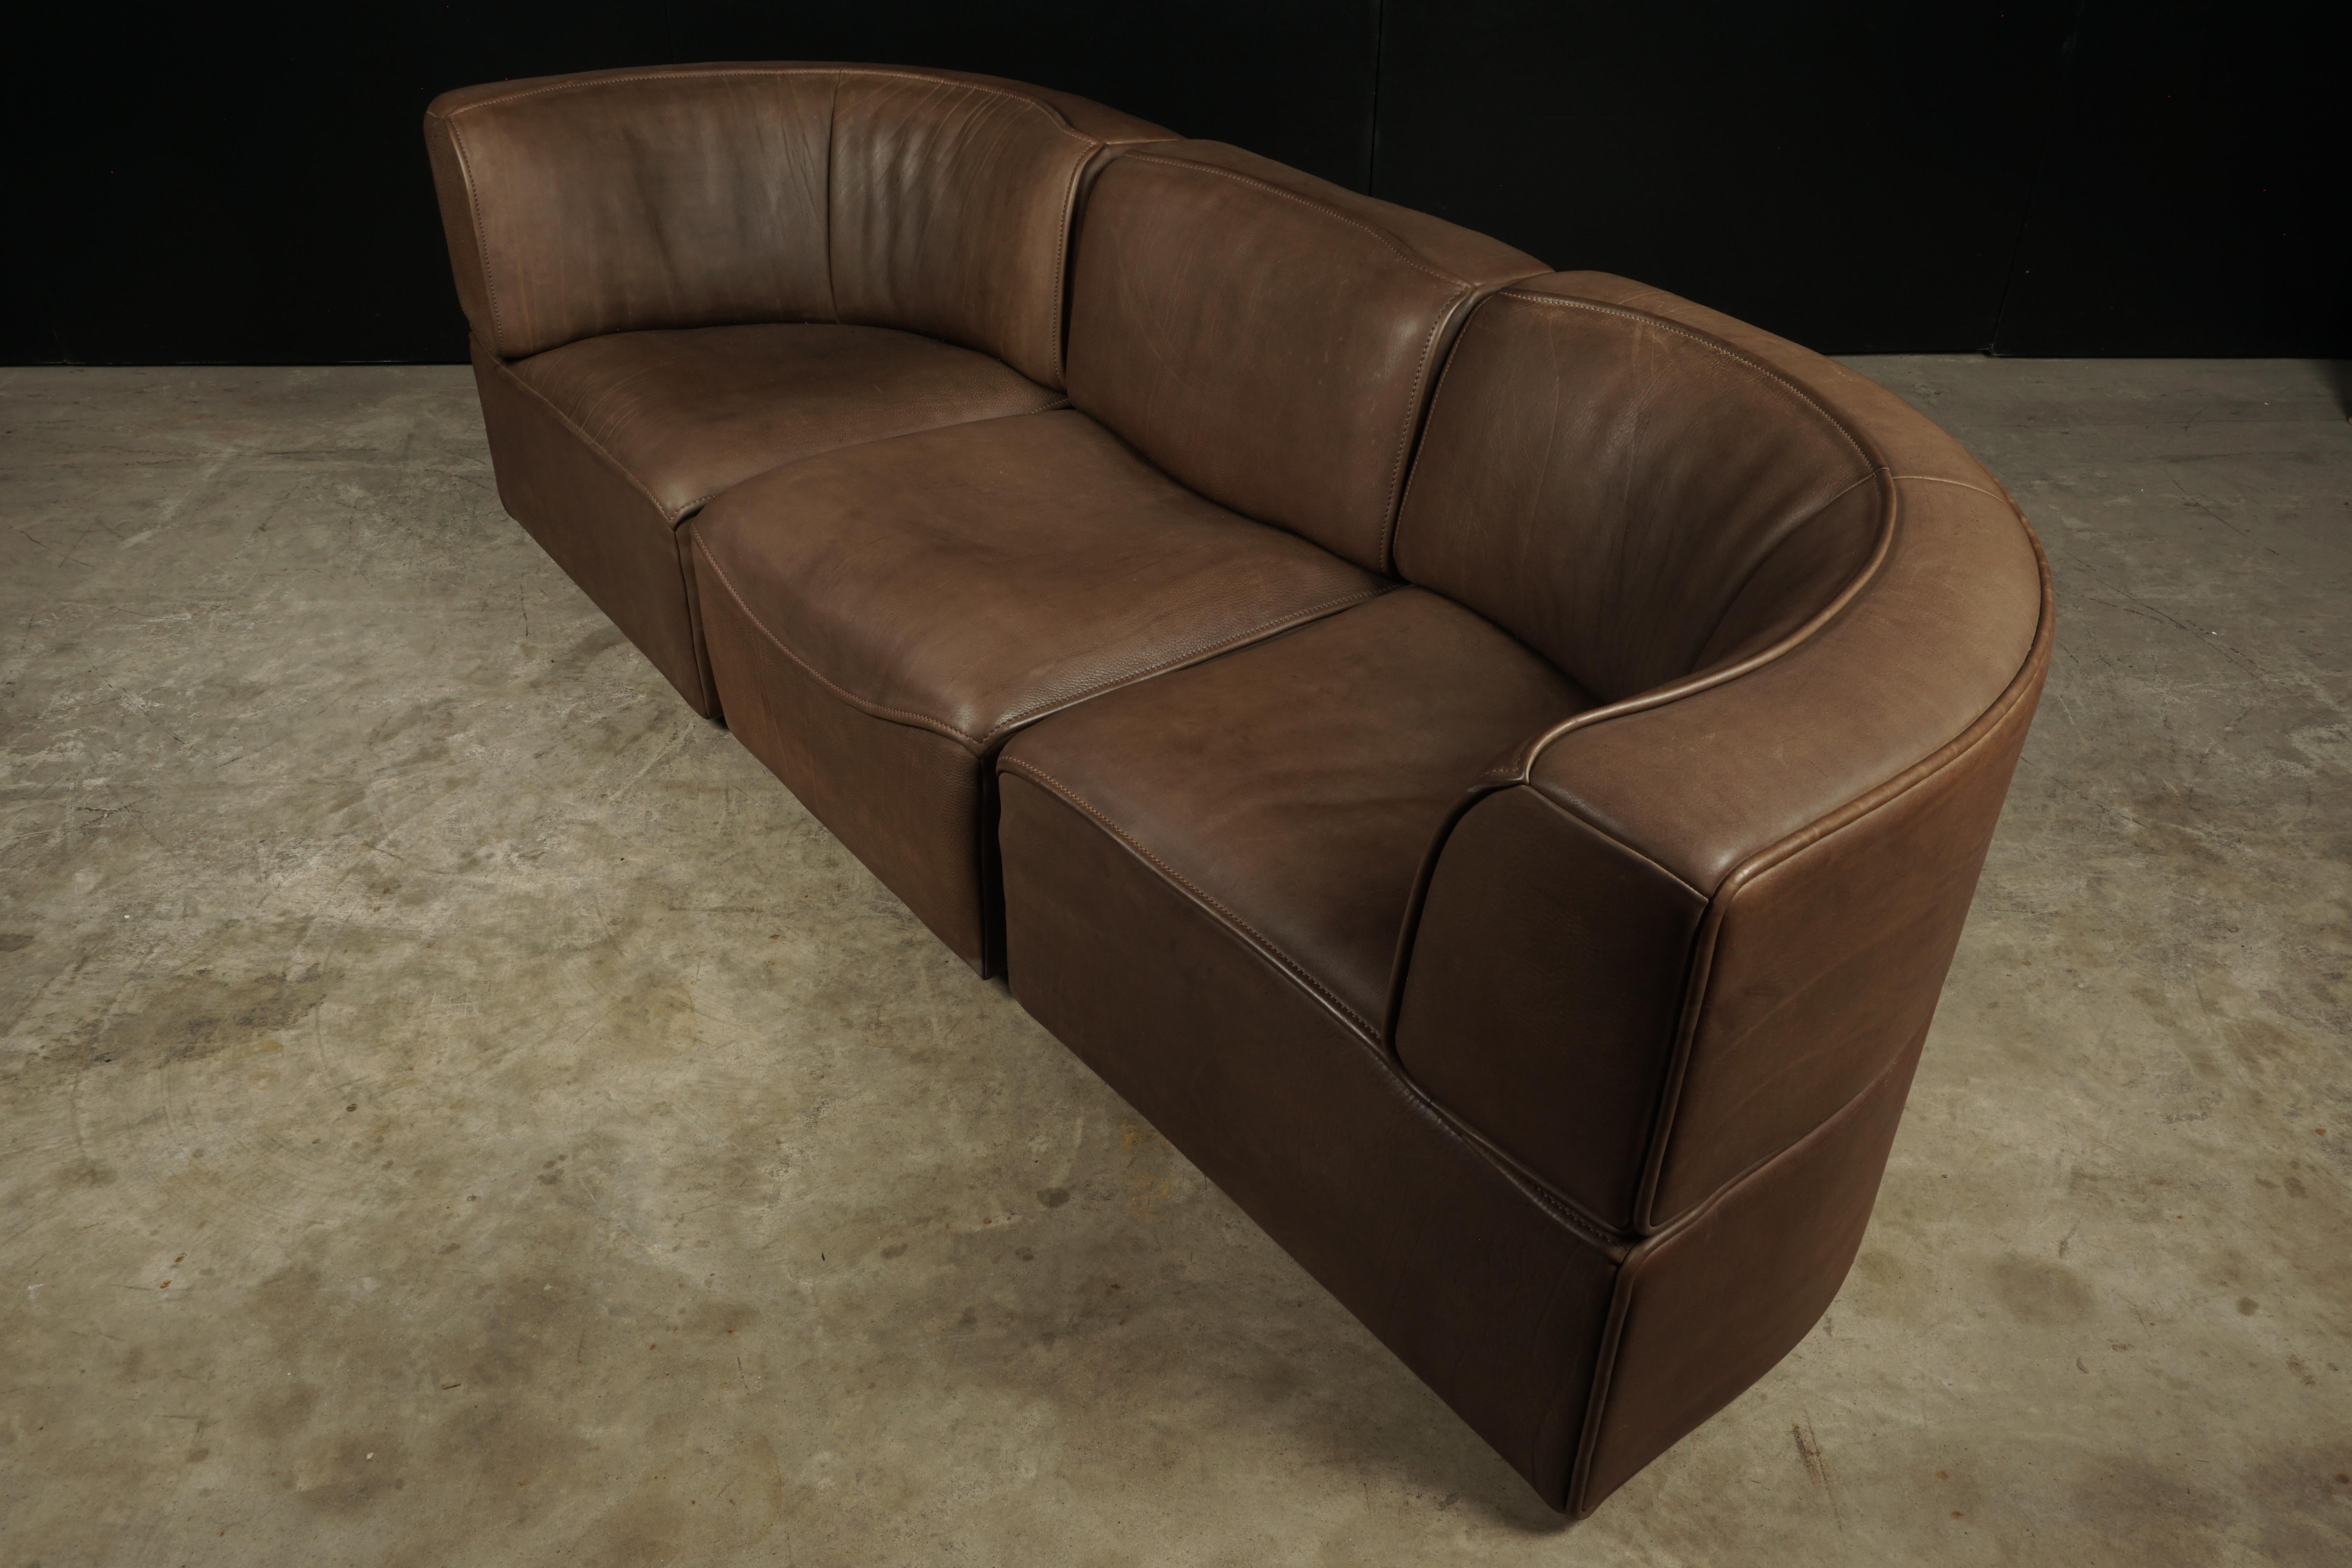 Modular De Sede DS-15 sofa from Switzerland, circa 1970. Very solid wooden frame construction covered with thick brown buffalo leather.